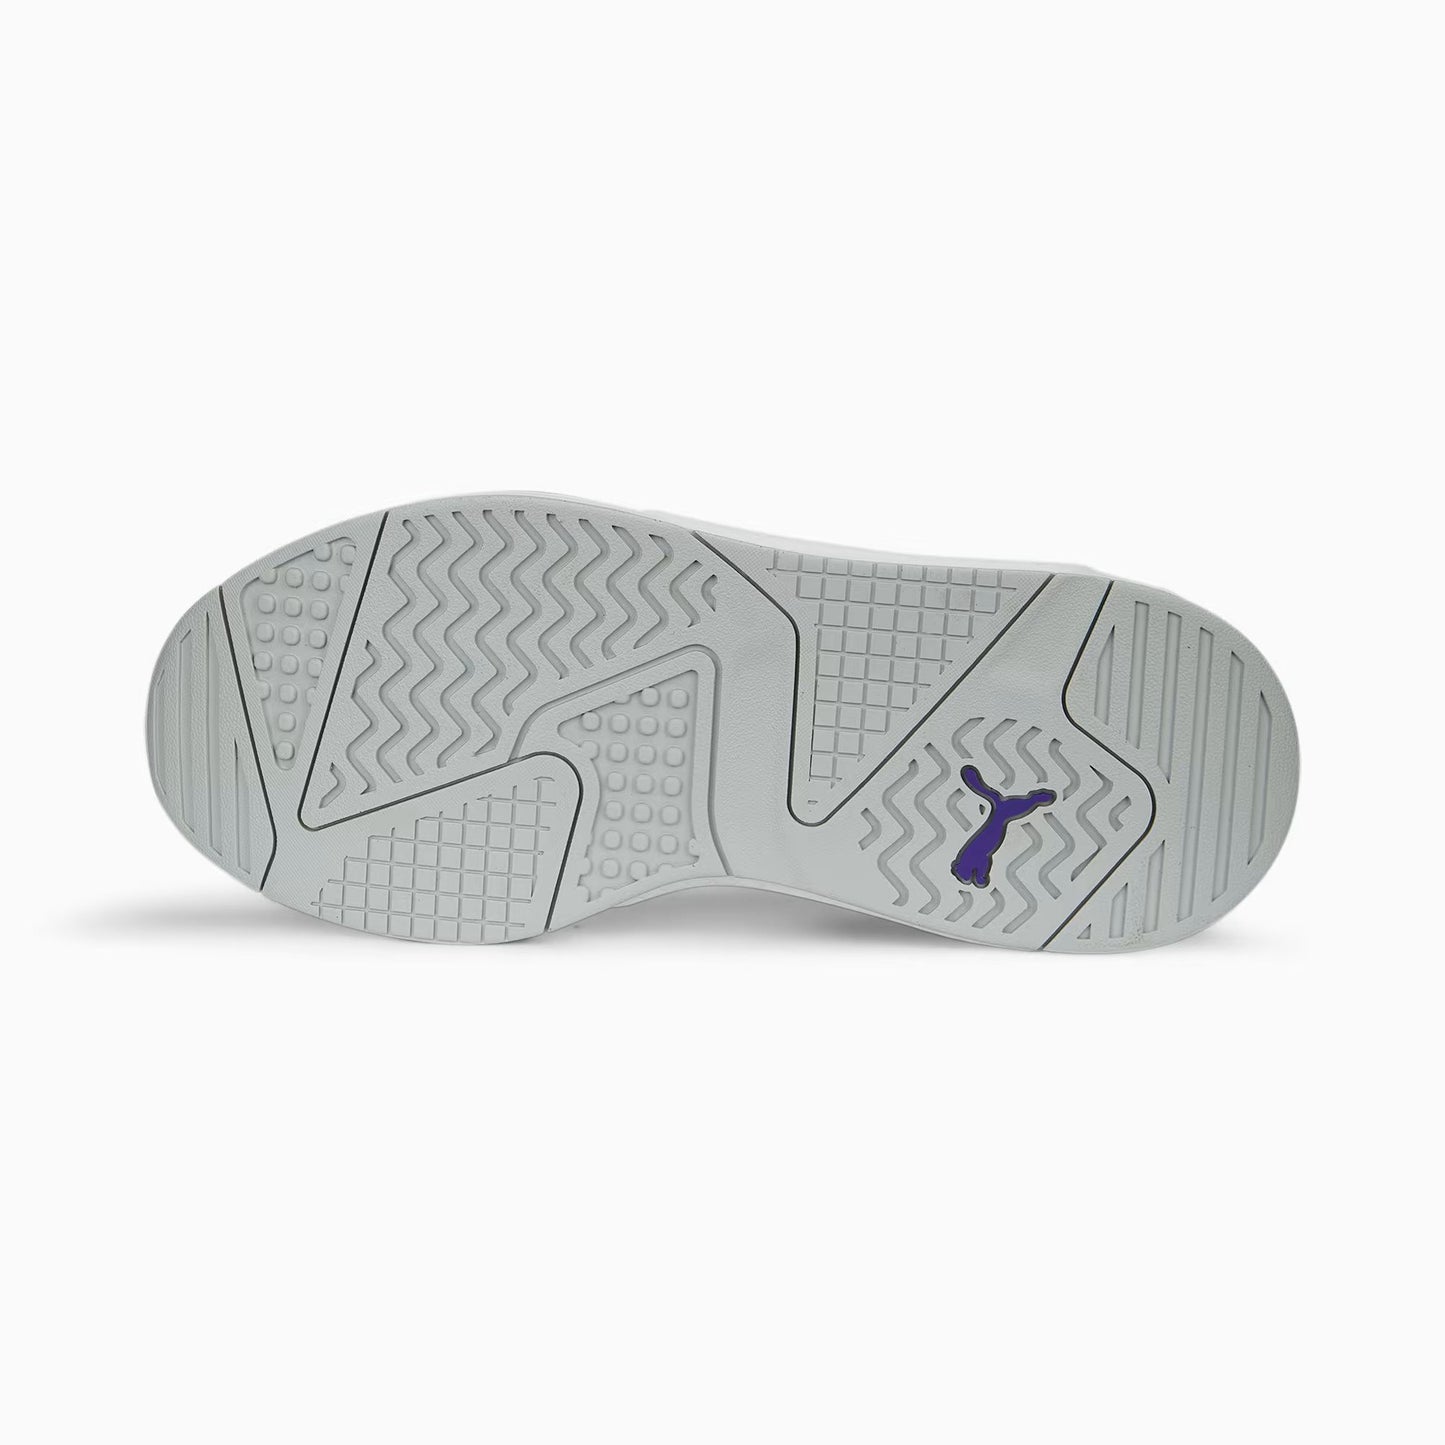 X-Ray 2 Square Men's Sneakers-373108 74